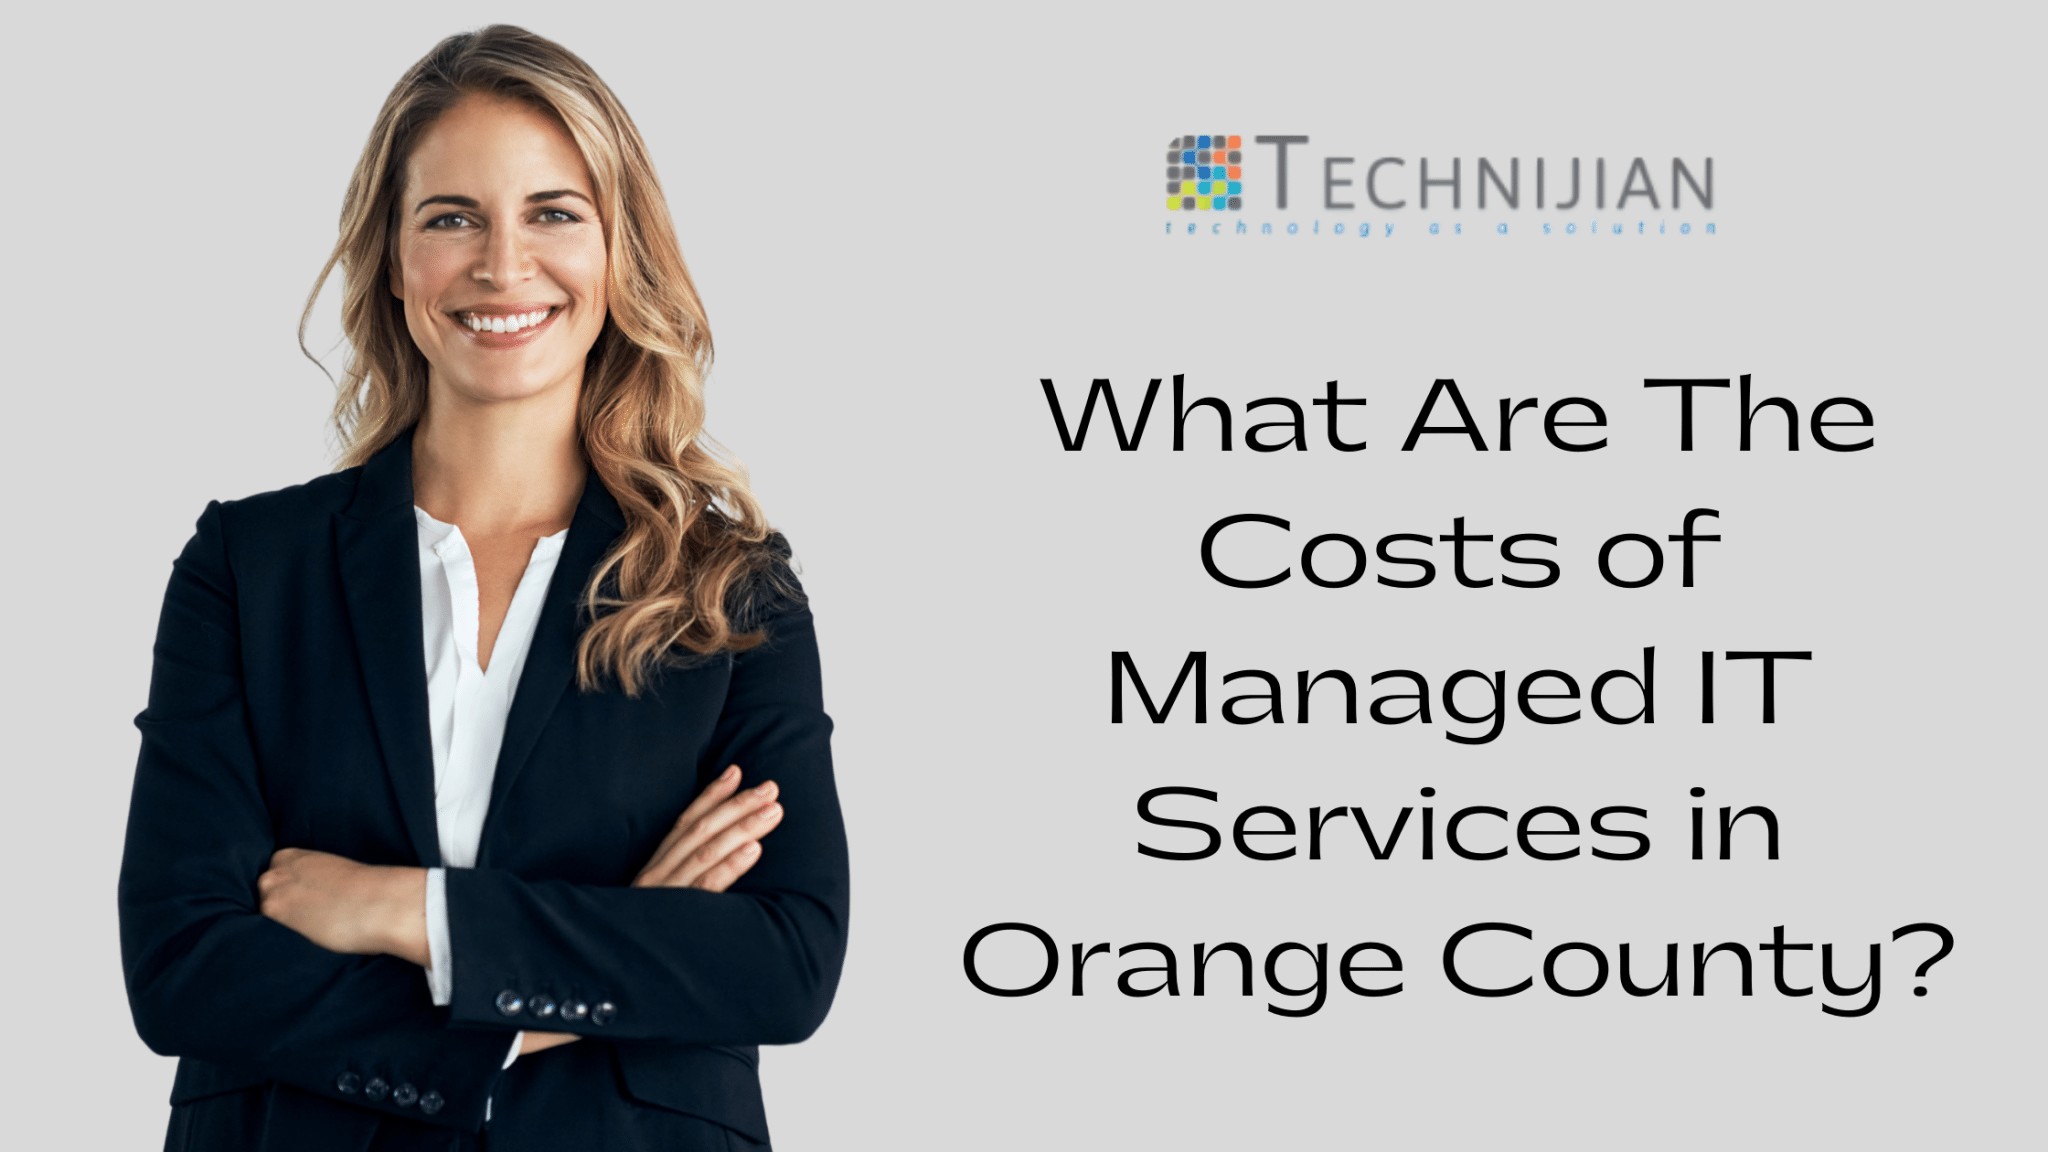 What Are The Costs of Managed IT Services in Orange County?